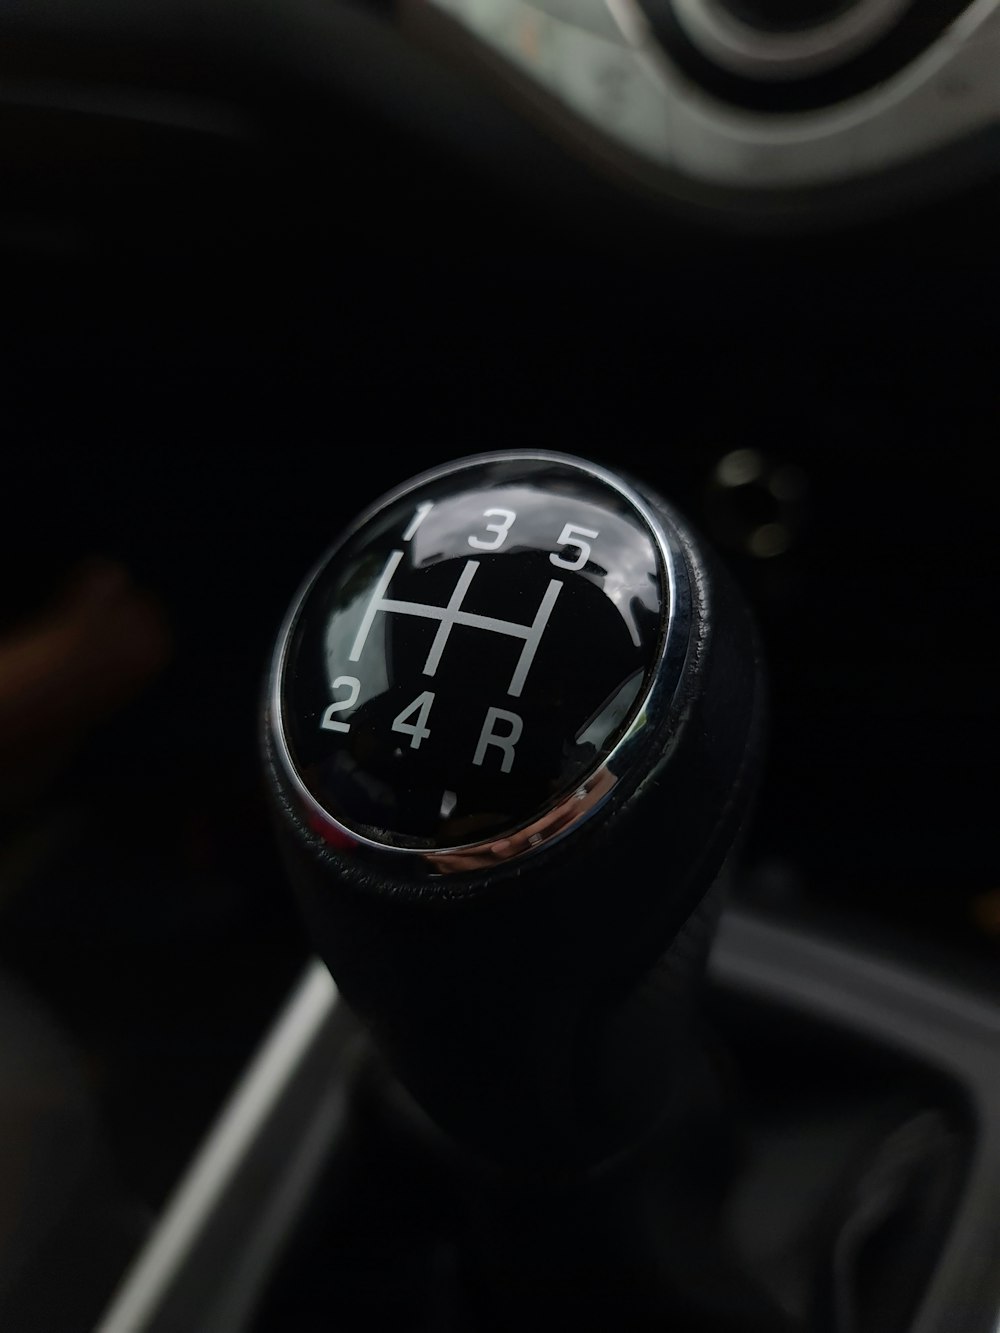 black and silver car gear shift lever